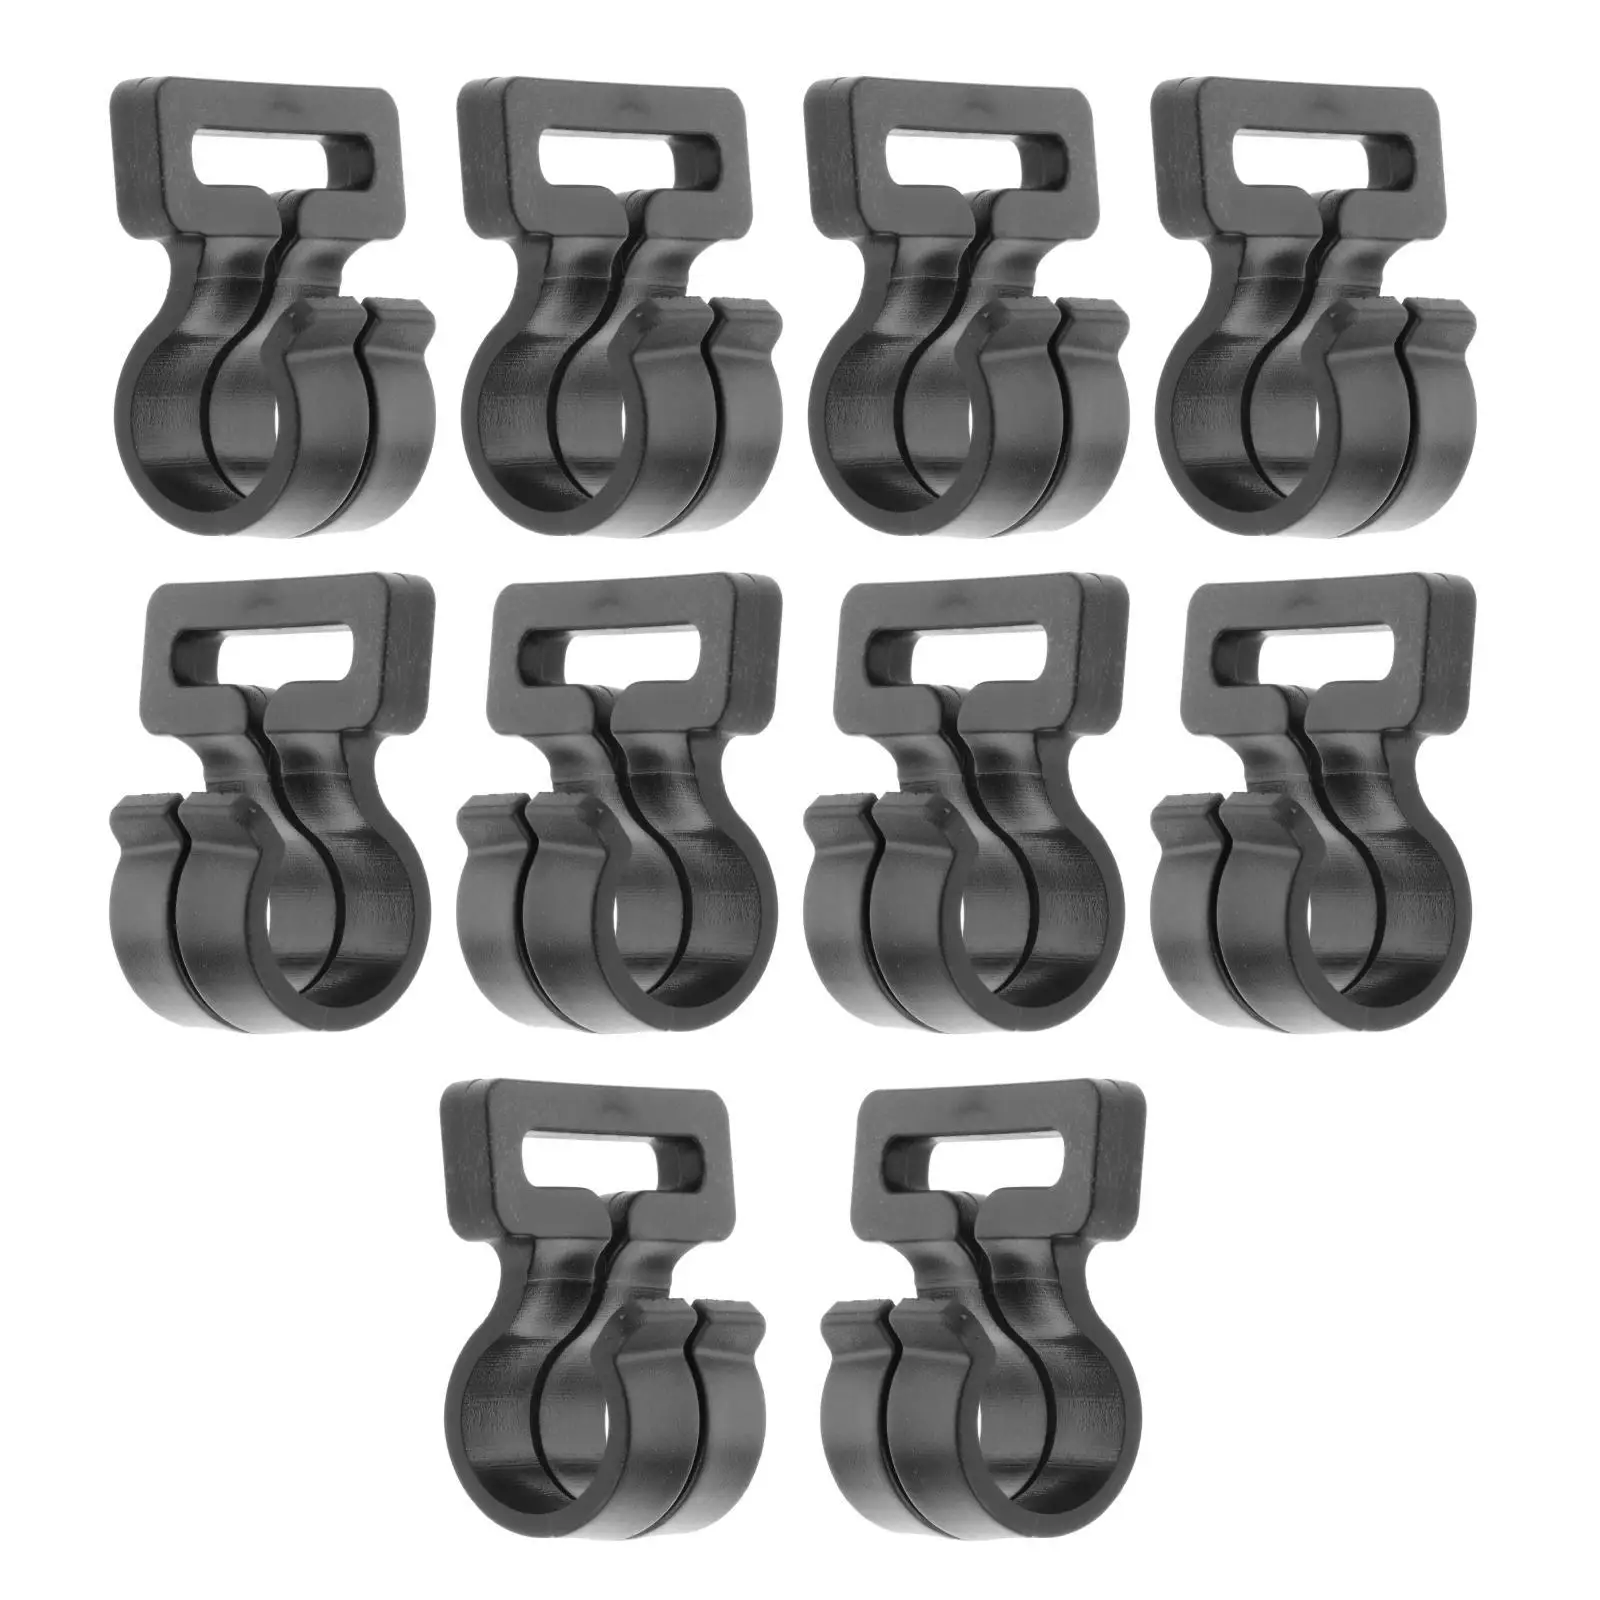 10 Pieces Camping Tent Pole Hook Awning Hooks Post Clips Reusable Black High Quality C Clips Set for Hiking Travel Caravan Tent